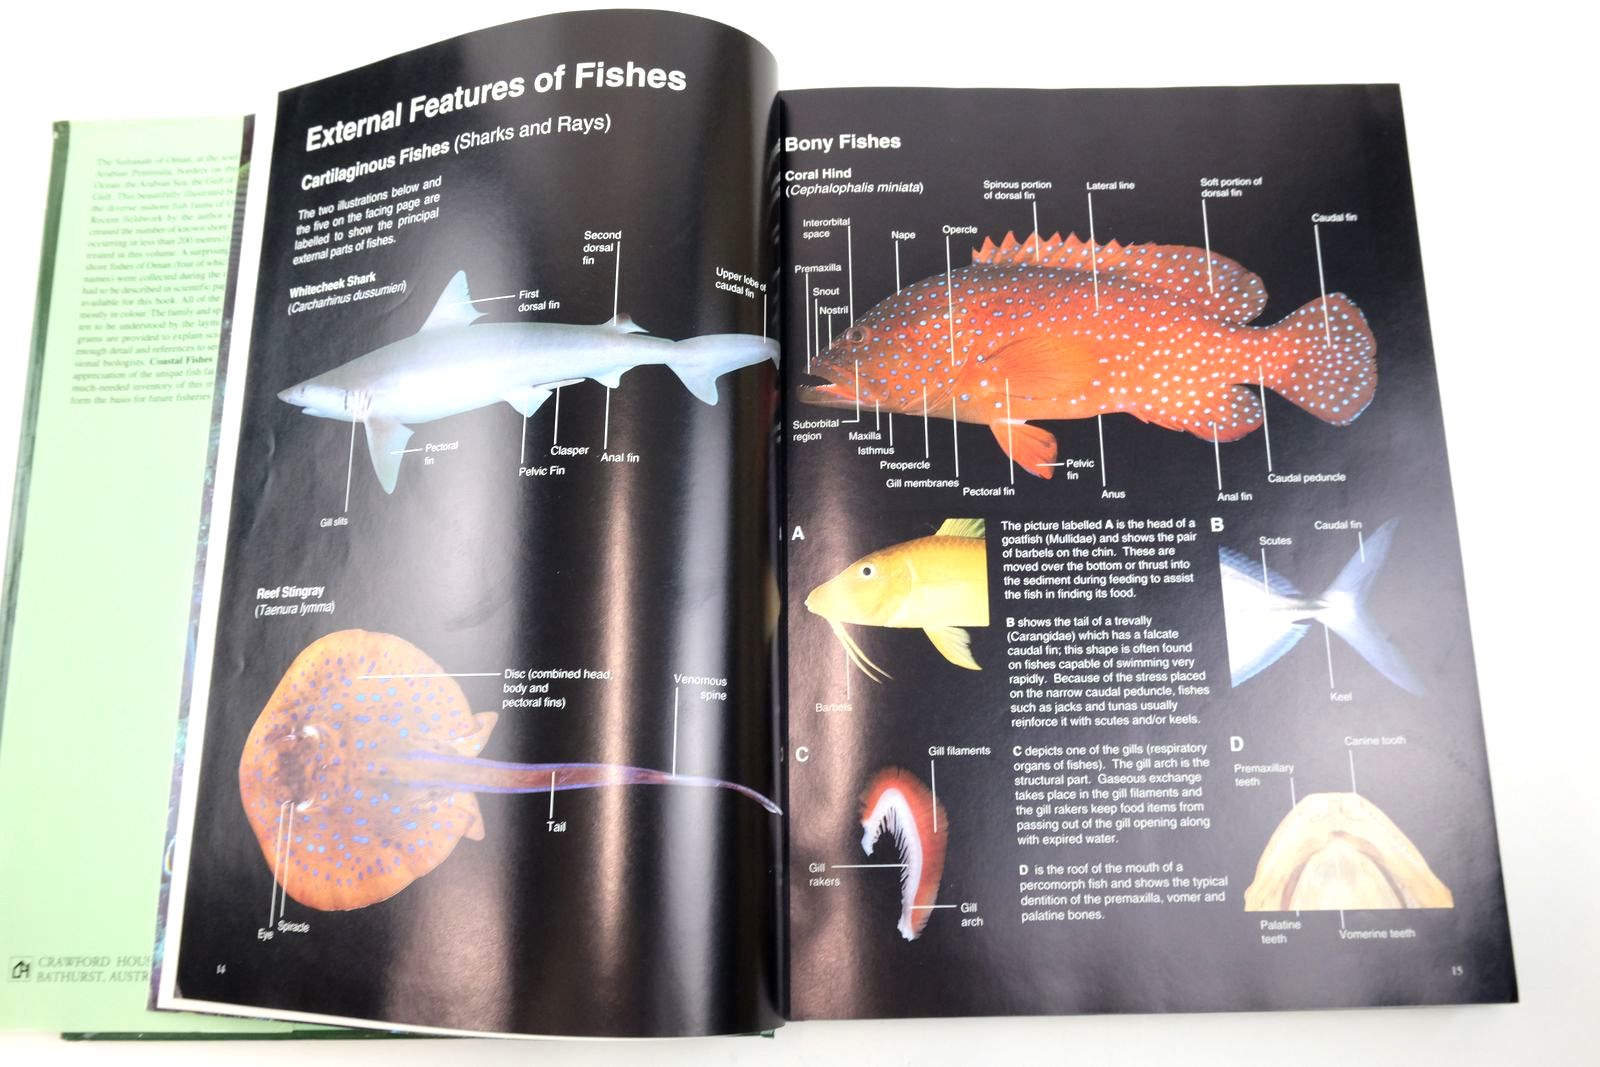 Photo of COASTAL FISHES OF OMAN written by Randall, John E. published by Crawford House Publishing (STOCK CODE: 2139610)  for sale by Stella & Rose's Books